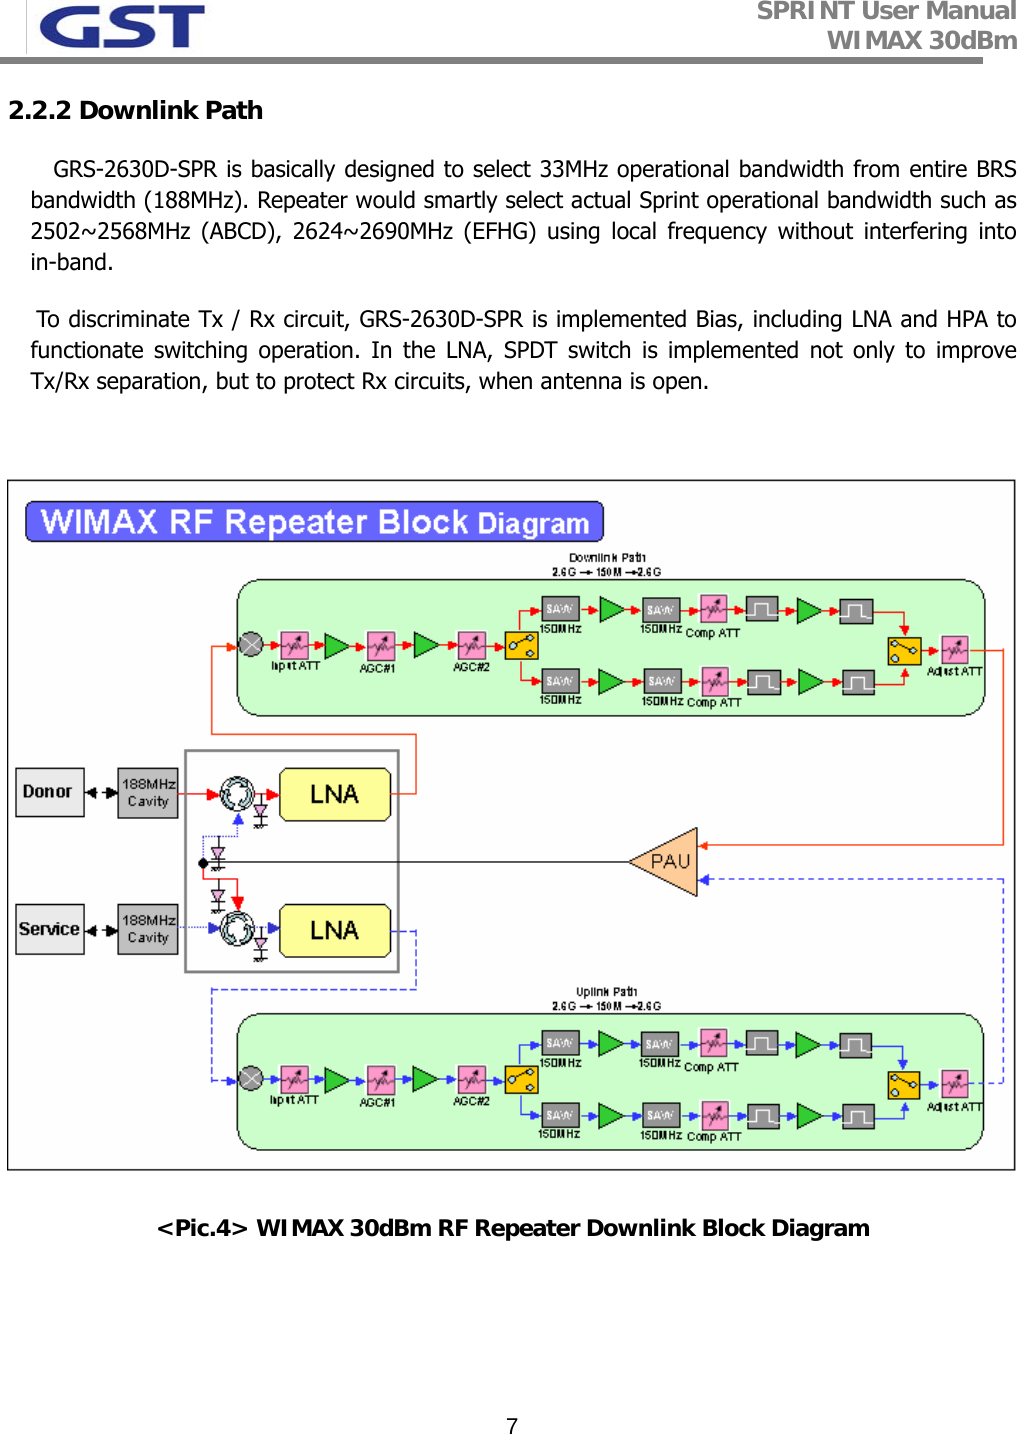 SPRINT User Manual WIMAX 30dBm   72.2.2 Downlink Path GRS-2630D-SPR is basically designed to select 33MHz operational bandwidth from entire BRS bandwidth (188MHz). Repeater would smartly select actual Sprint operational bandwidth such as 2502~2568MHz (ABCD), 2624~2690MHz (EFHG) using local frequency without interfering into in-band.     To discriminate Tx / Rx circuit, GRS-2630D-SPR is implemented Bias, including LNA and HPA to functionate switching operation. In the LNA, SPDT switch is implemented not only to improve Tx/Rx separation, but to protect Rx circuits, when antenna is open.         &lt;Pic.4&gt; WIMAX 30dBm RF Repeater Downlink Block Diagram   